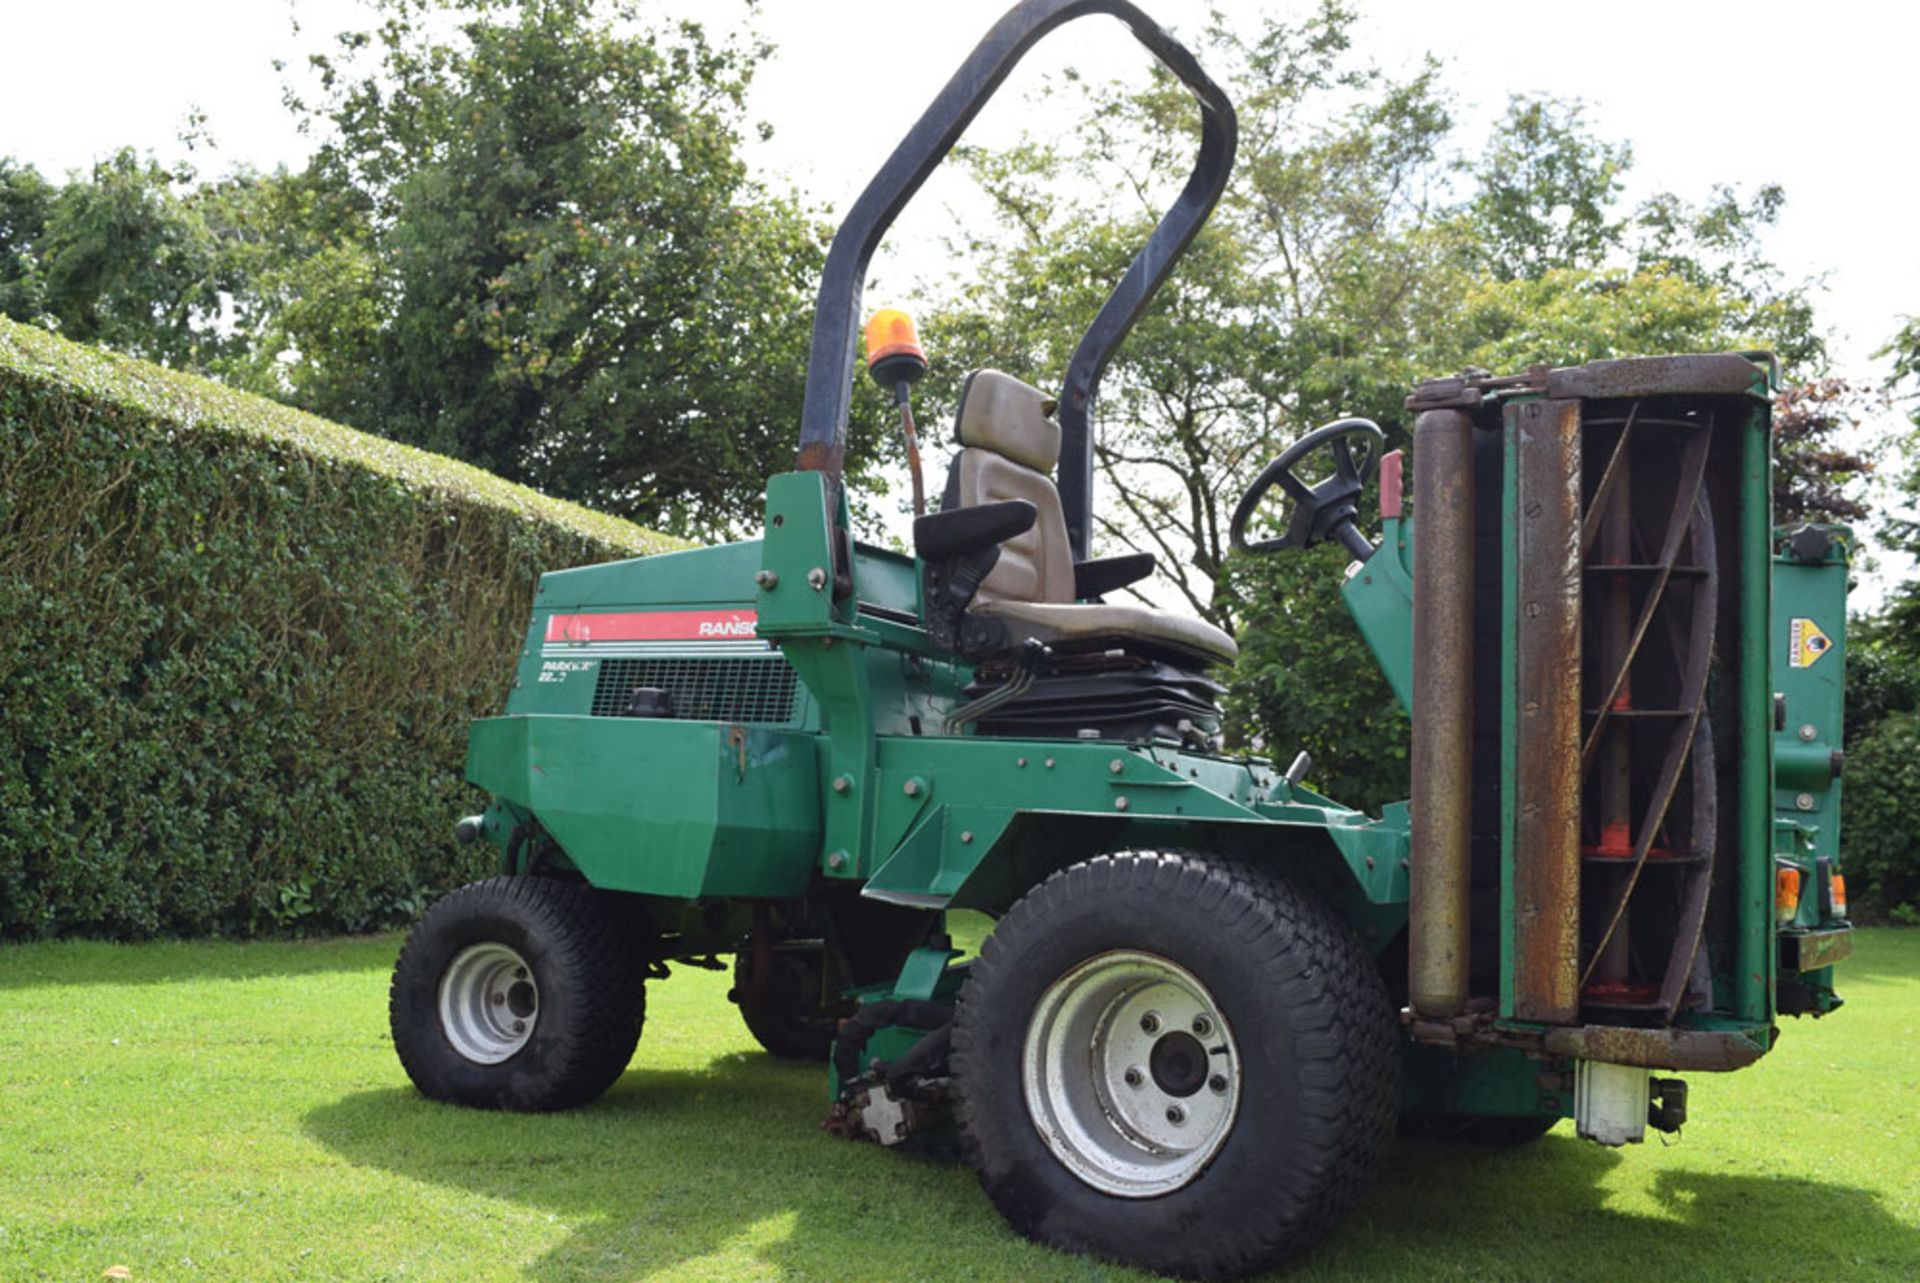 2003 Ransomes Parkway 2250 Plus Ride On Cylinder Mower - Image 5 of 8